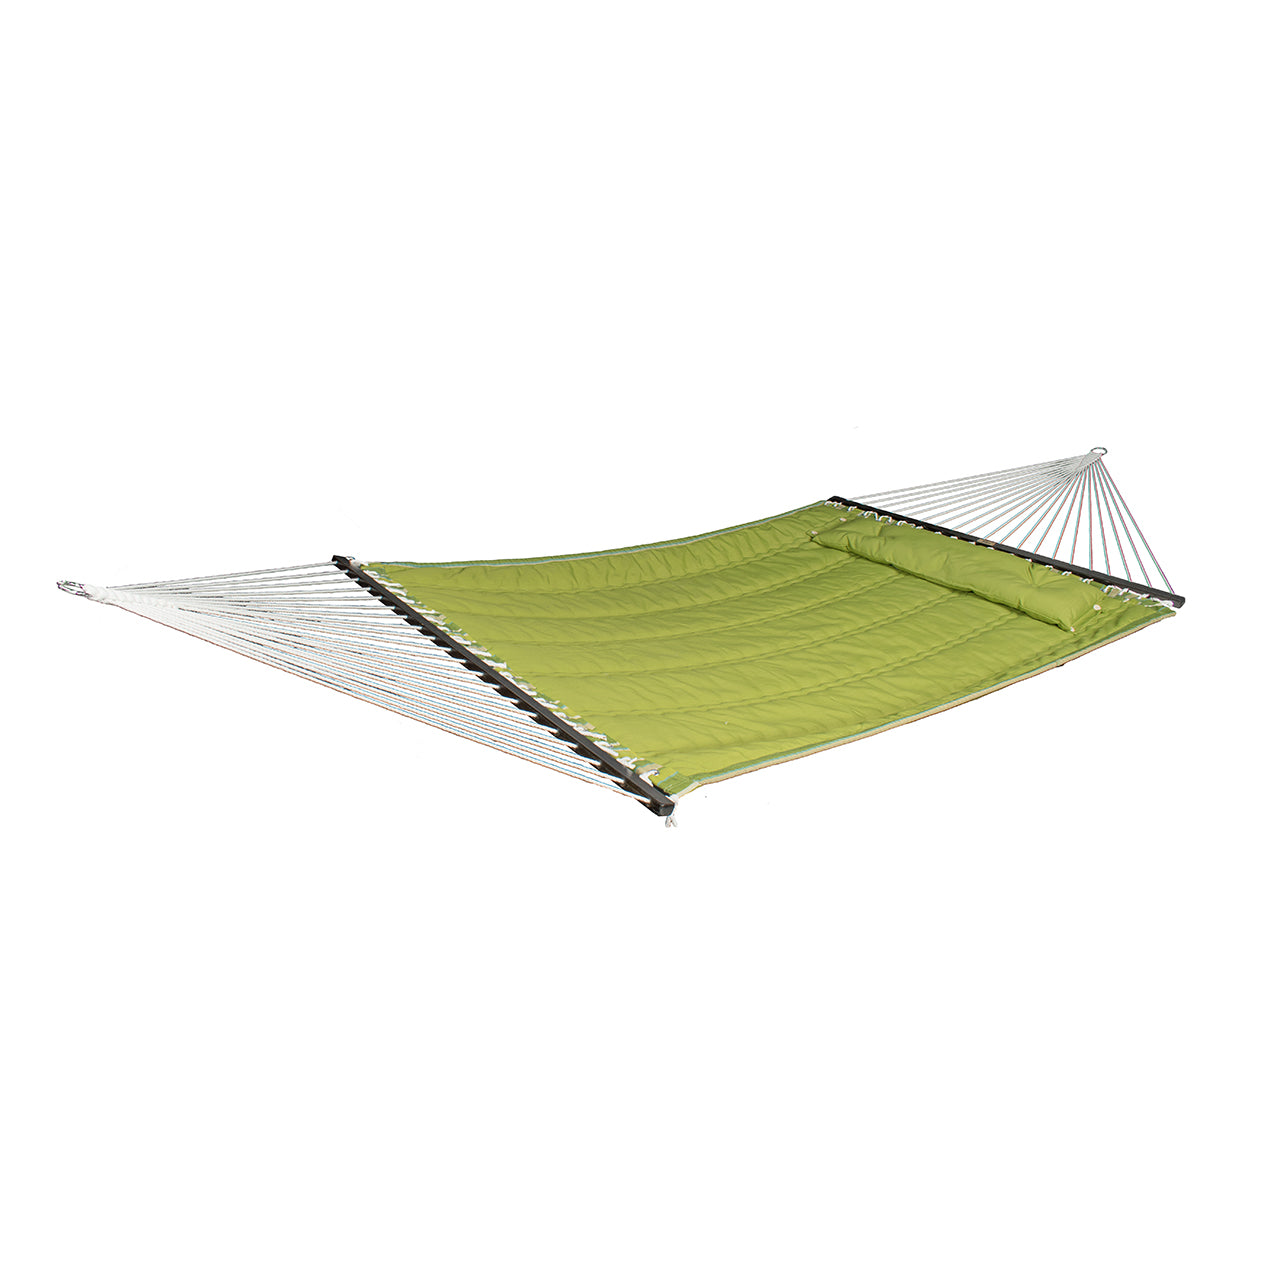 Bliss Hammocks 55-inch Wide 2-Person Reversible Quilted Hammock with Spreader Bars and a Pillow in the Green stripe / solid green variation showing the solid green side.